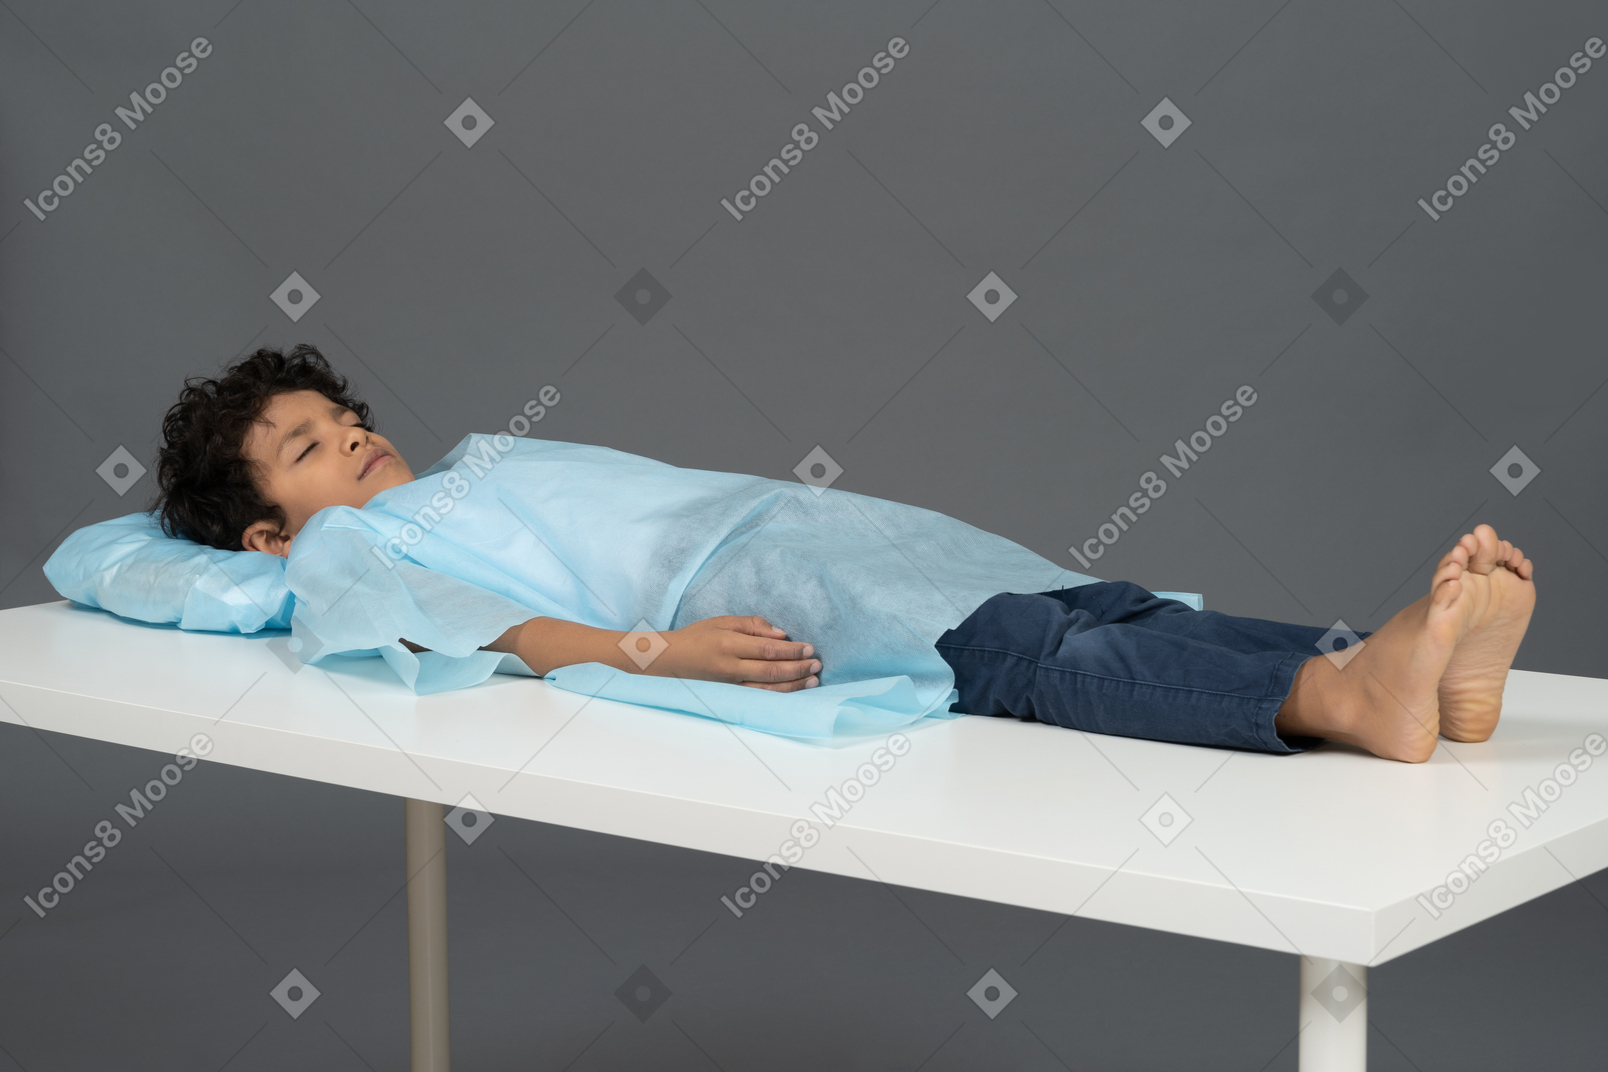 Child on the table